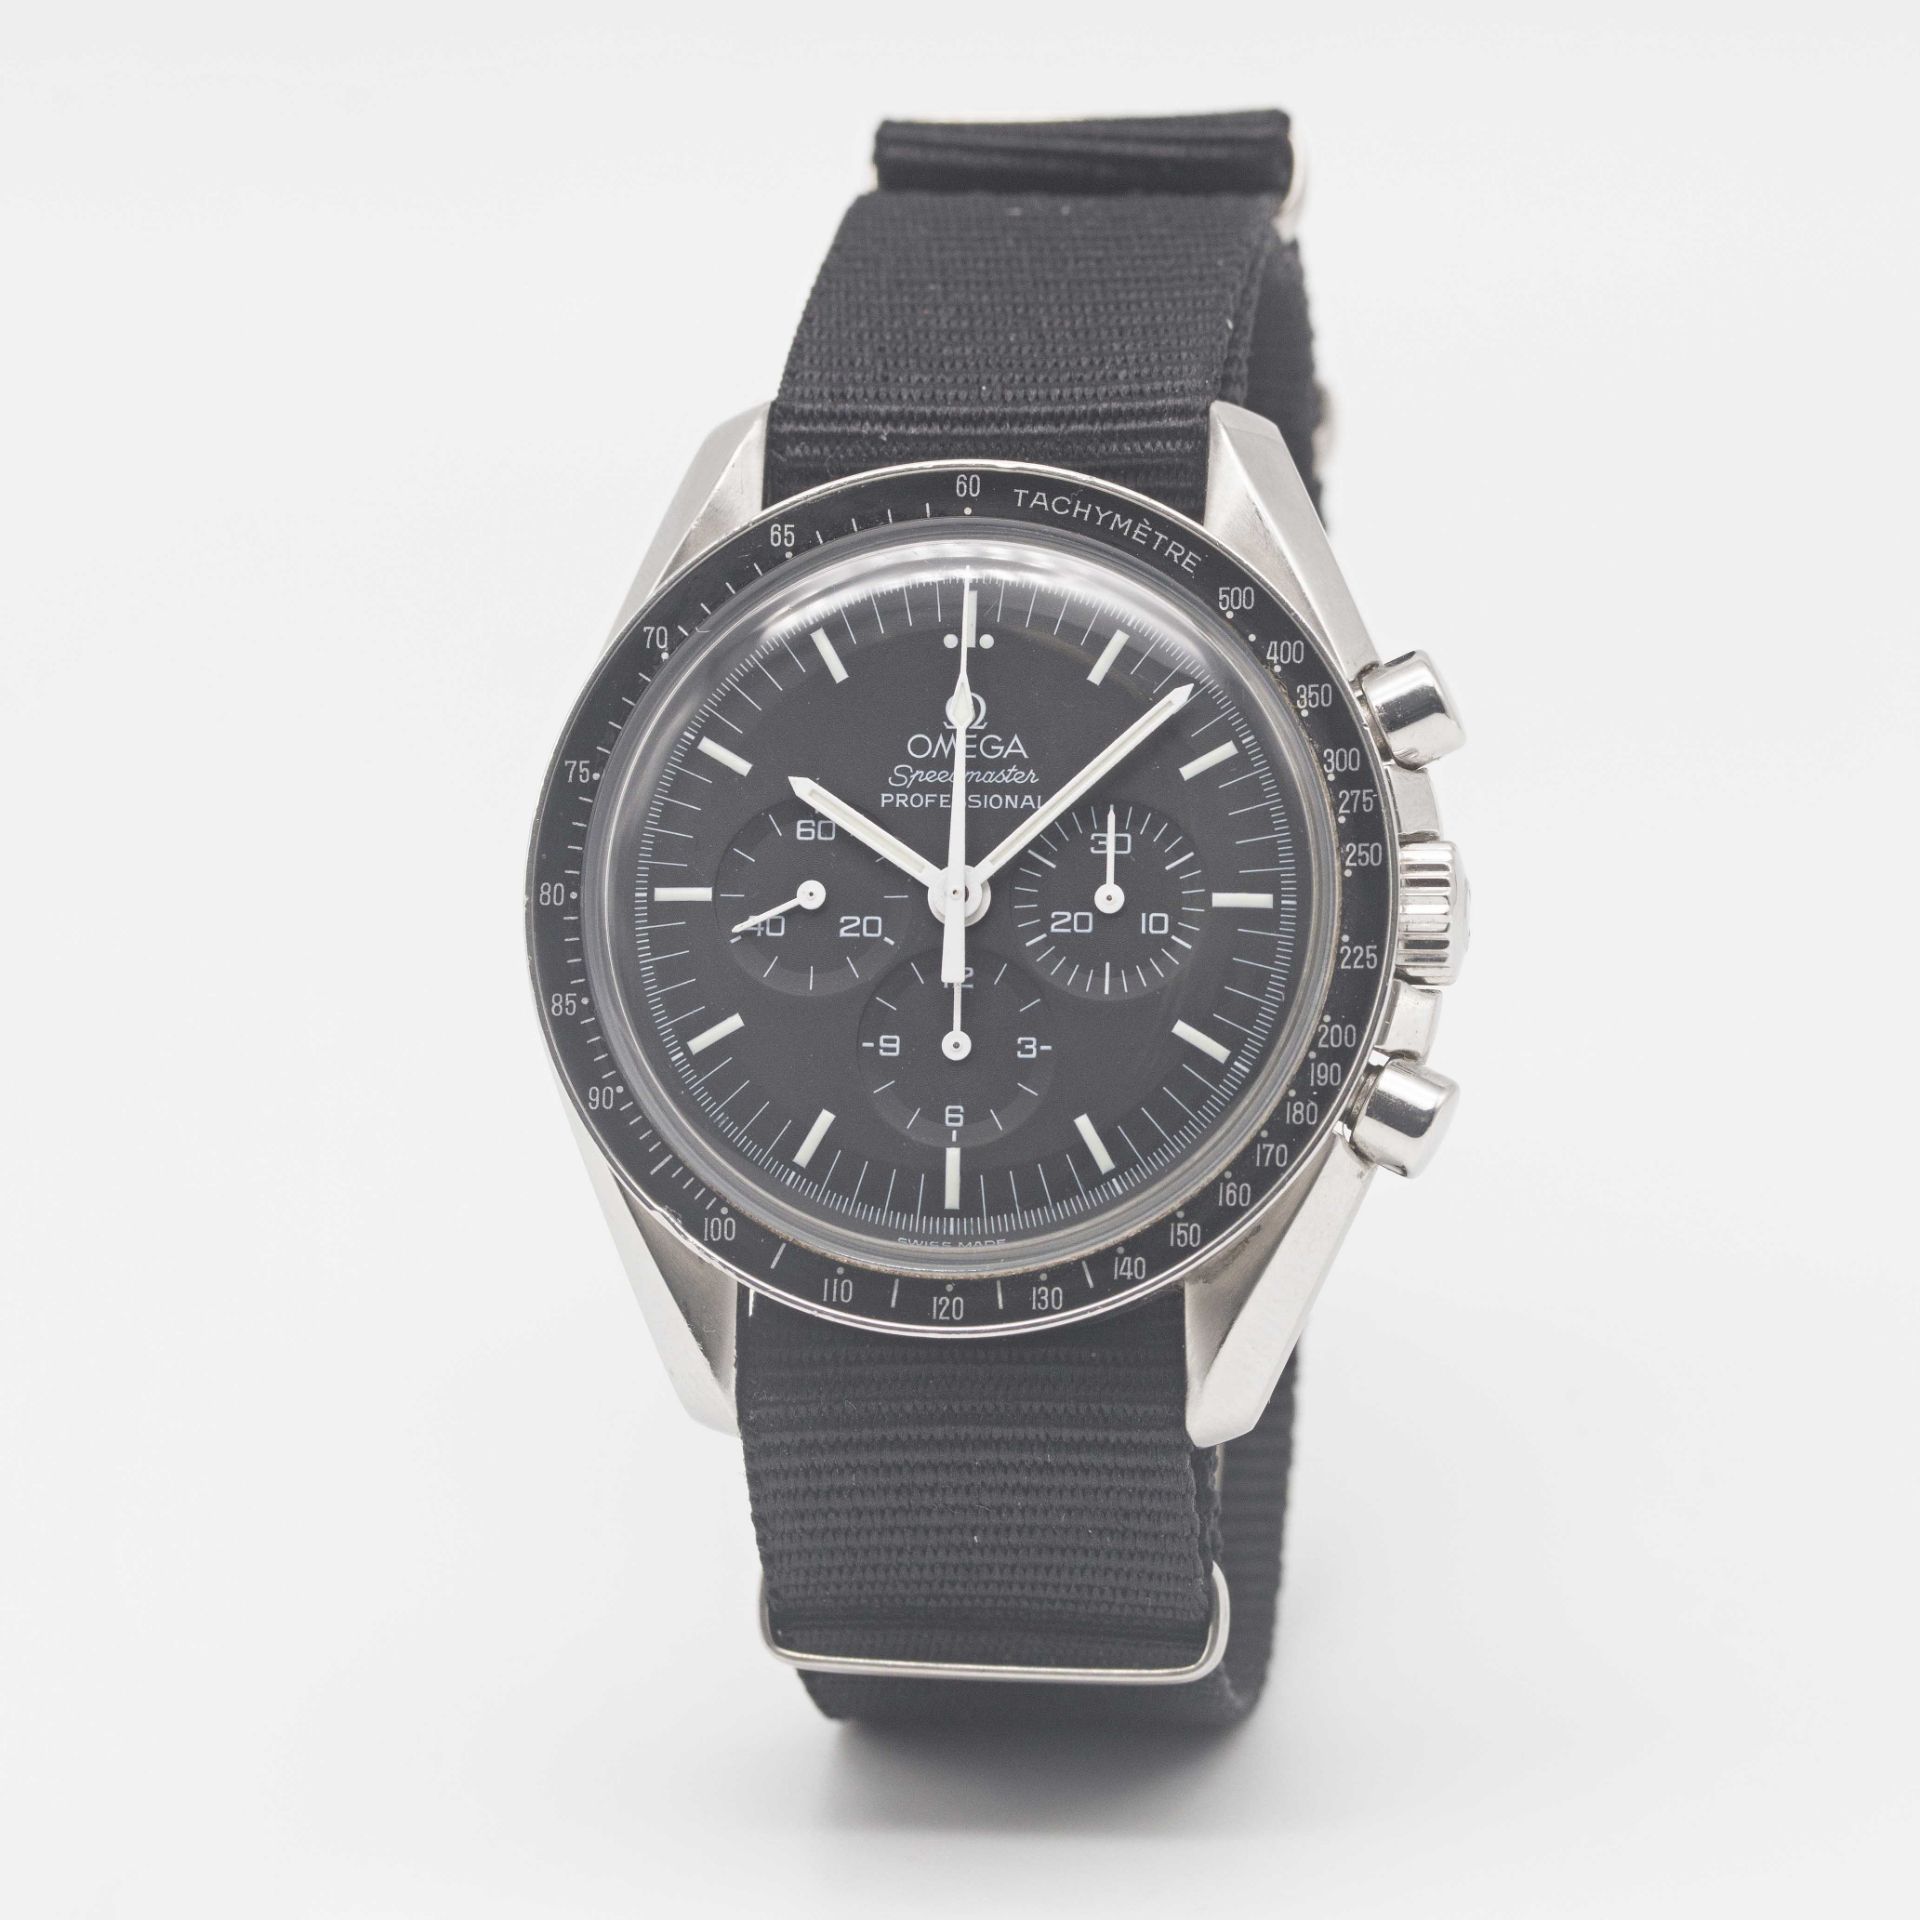 A GENTLEMAN'S STAINLESS STEEL OMEGA SPEEDMASTER PROFESSIONAL CHRONOGRAPH WRIST WATCH CIRCA 2000, - Image 4 of 9